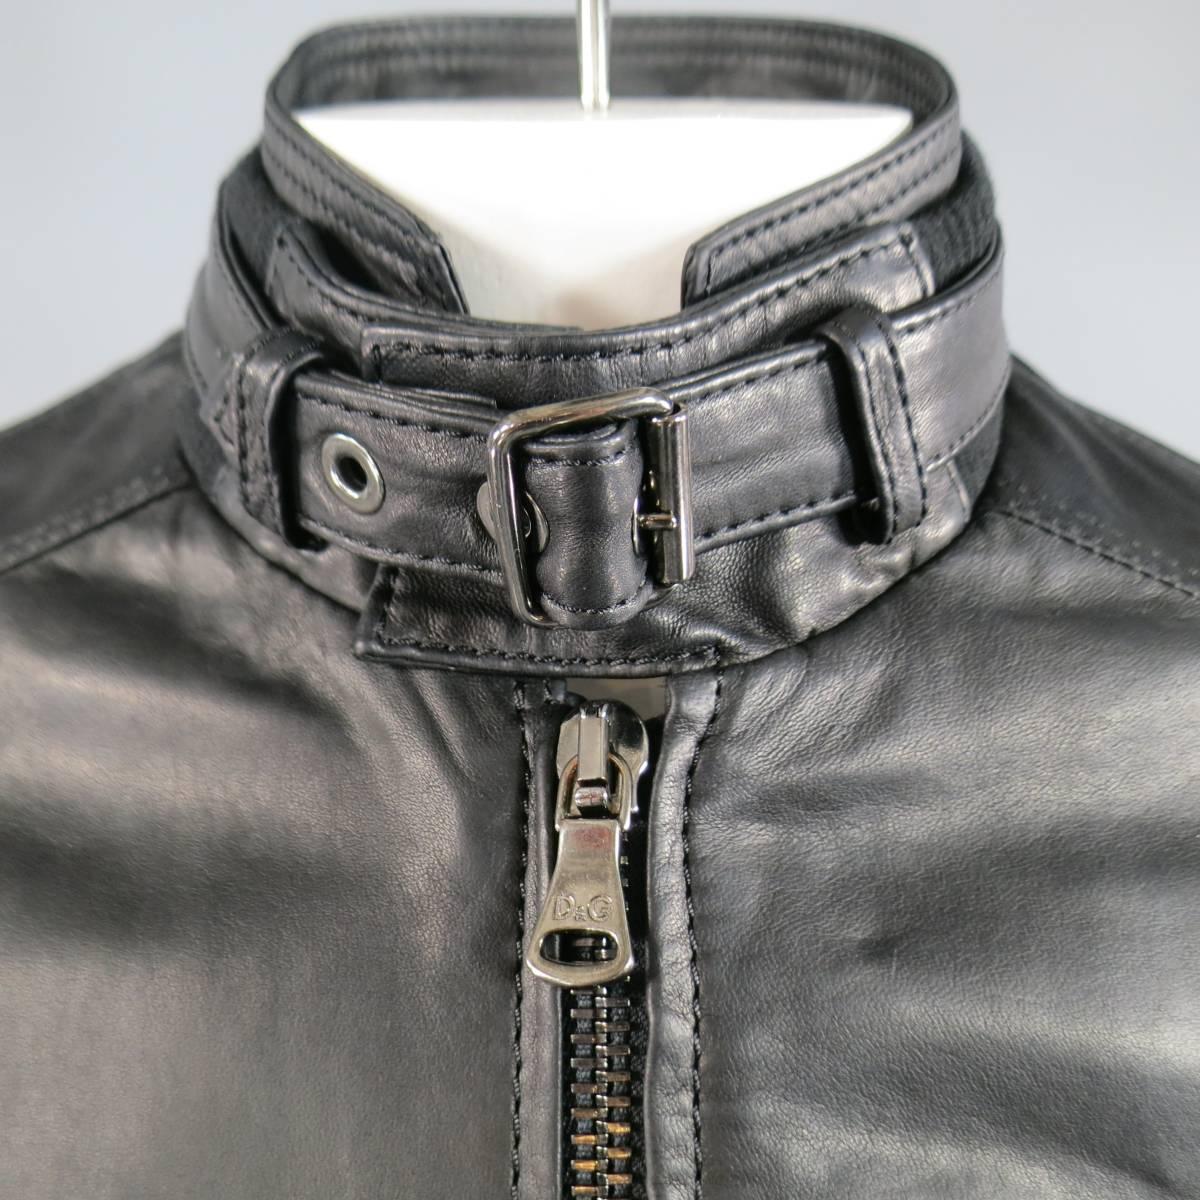 This chic D&G by DOLCE & GABBANA motorcycle jacket comes in a buttery soft black leather and features an oversized zip up front, symmetrical zip and patch flap snap pockets, paneled construction, ribbed zip cuffs, and layered ribbed stand up collar